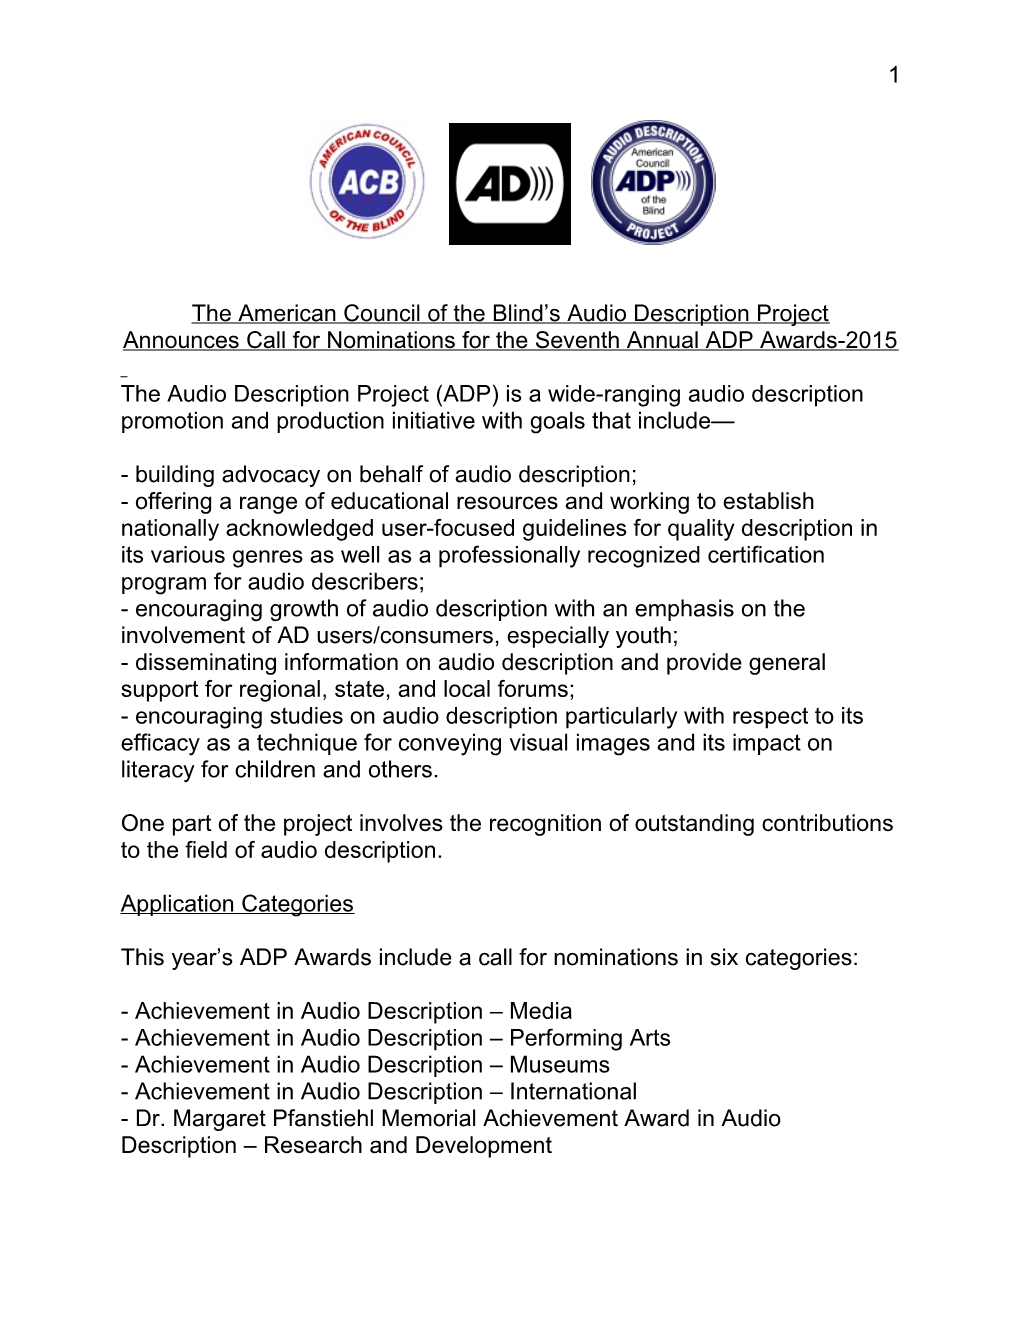 The American Council of the Blind S Audio Description Project Announces Call for Nominations